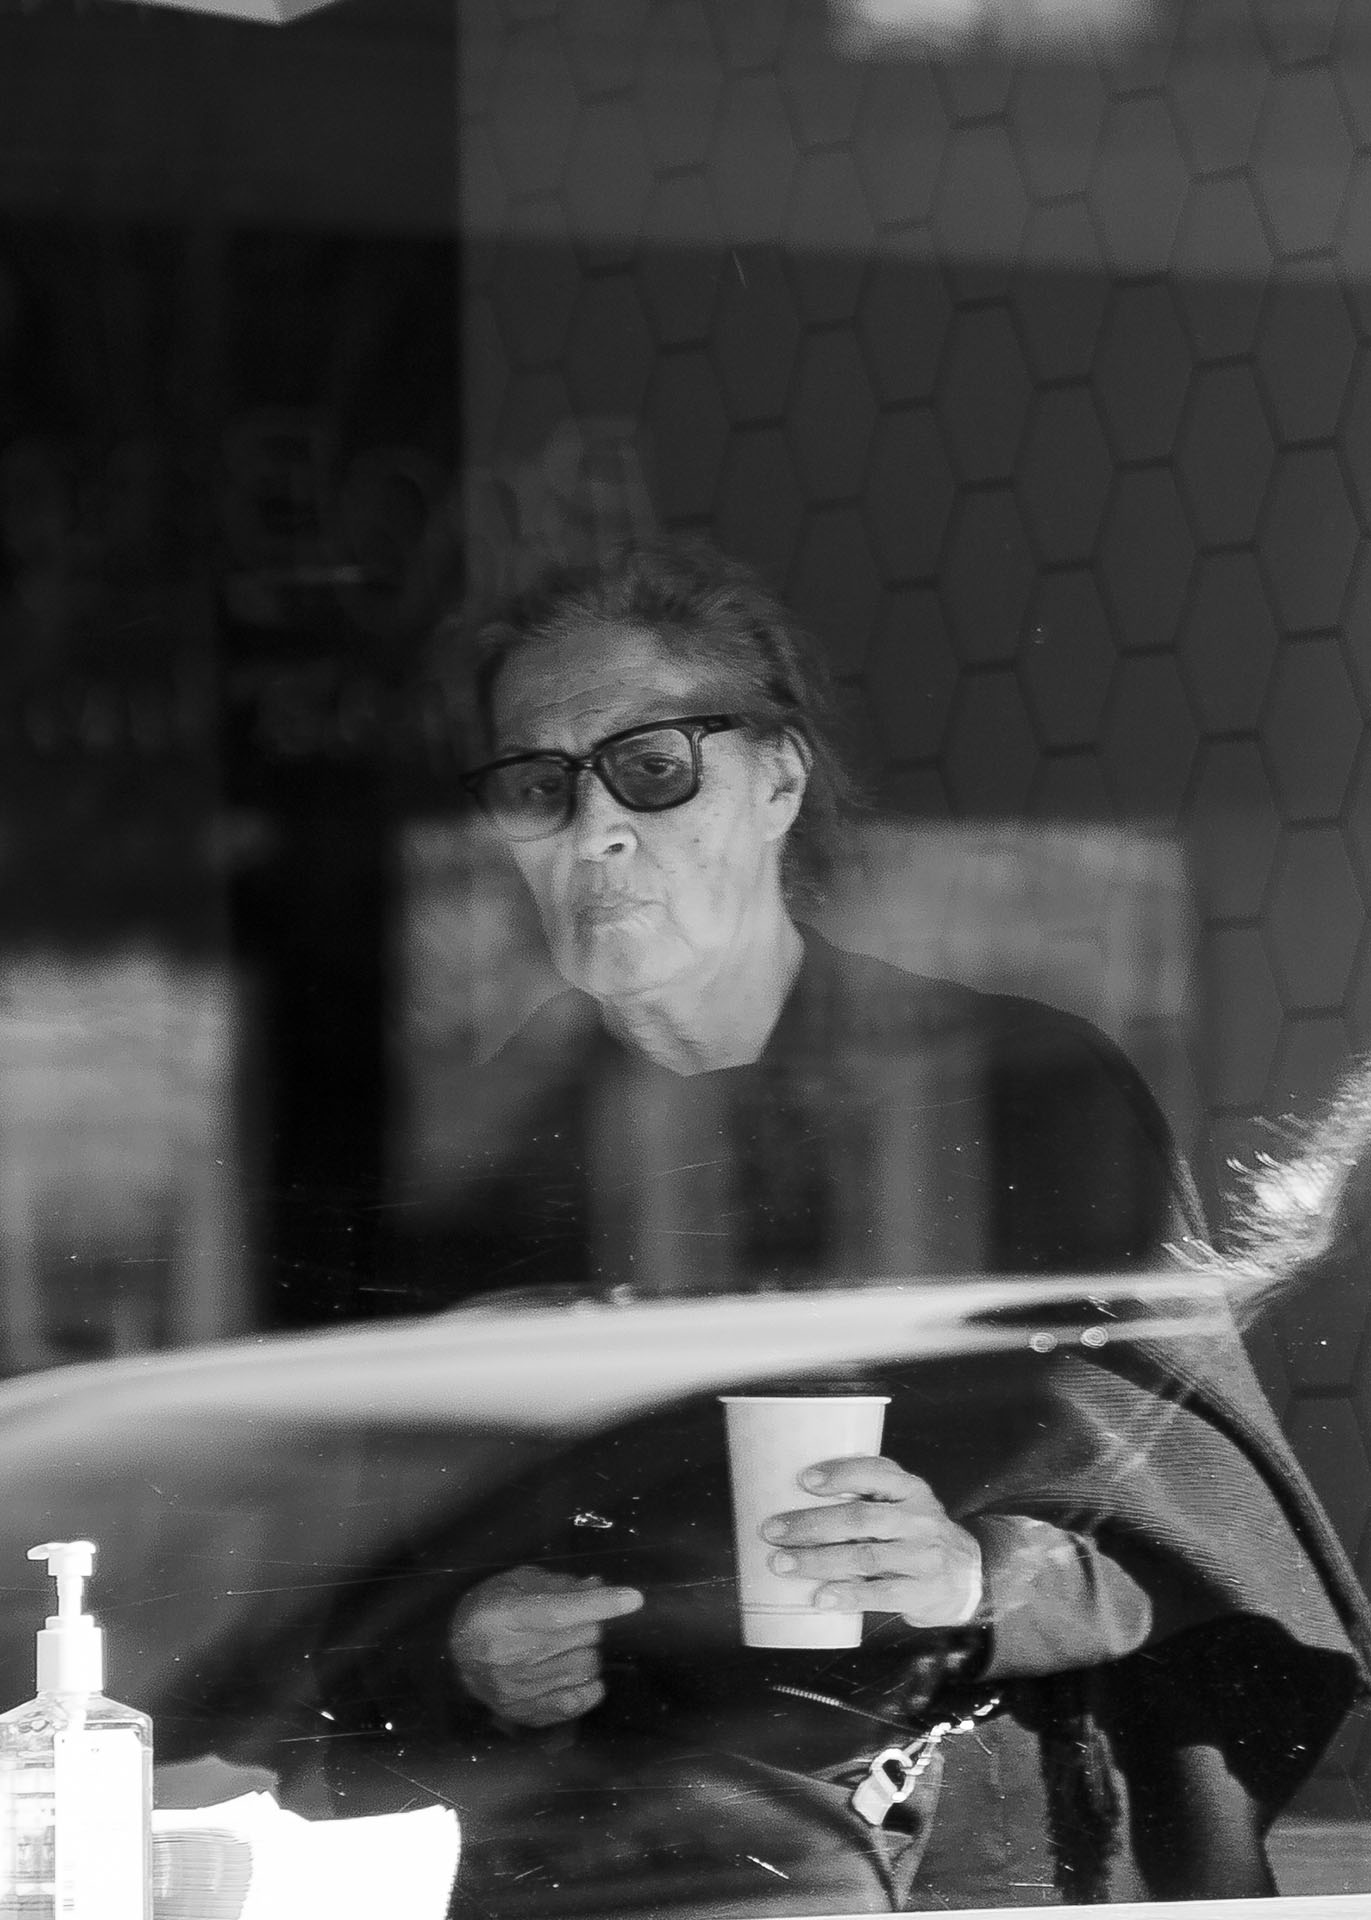 black and white image of a person grabbing a cup of coffee shot through a window